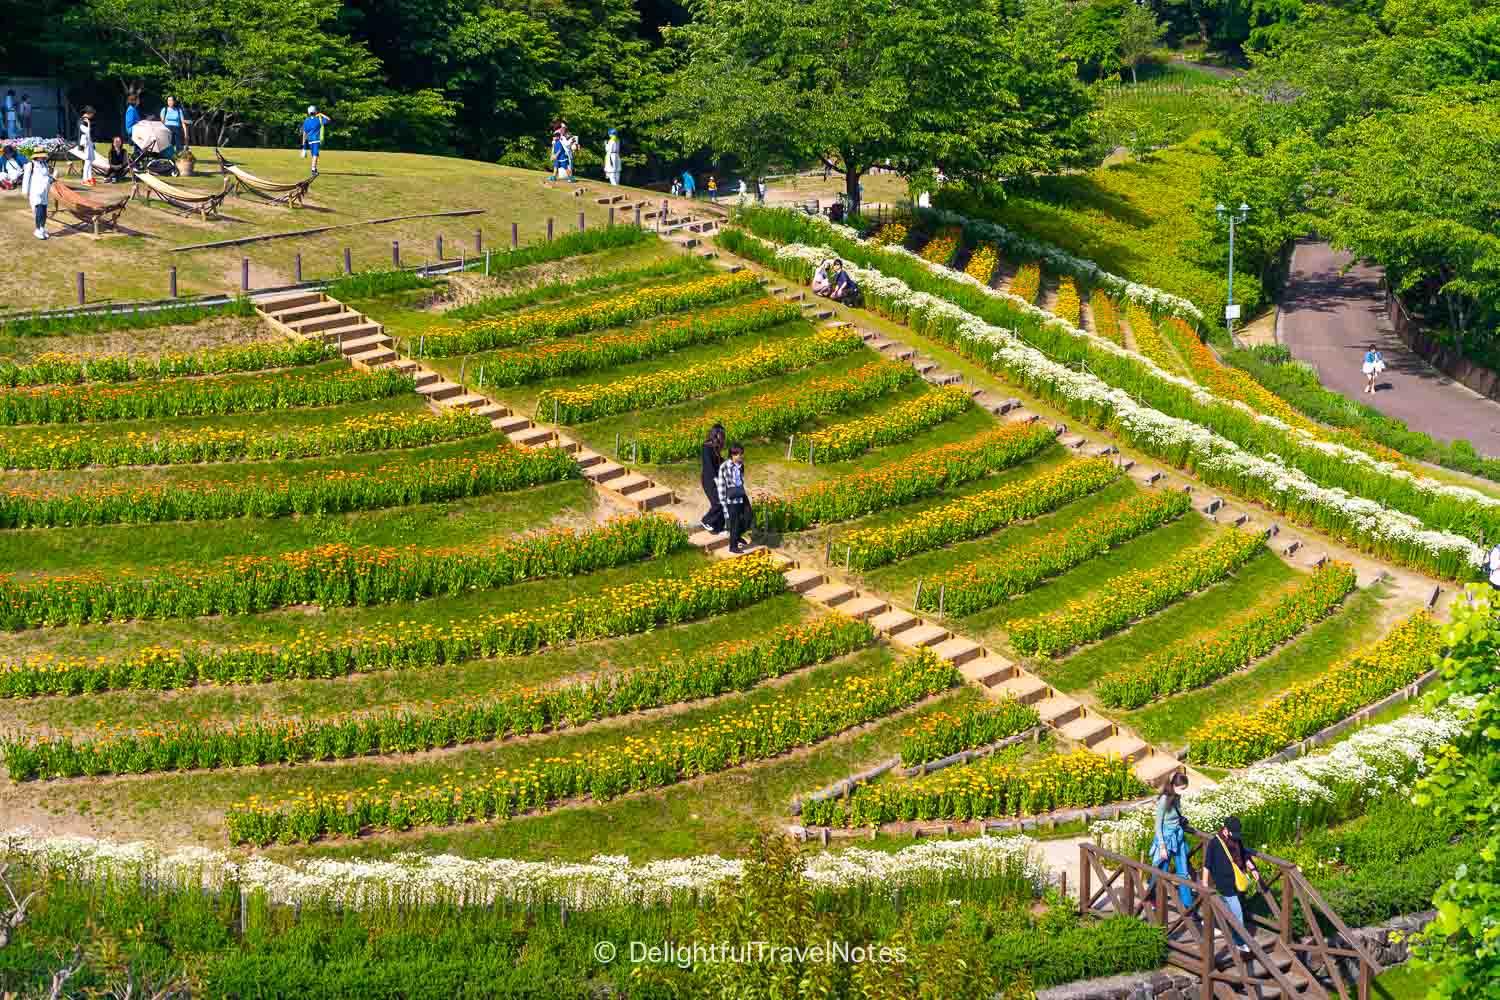 Cascading patches of flowers at Nunobiki Herb Gardens in Kobe.